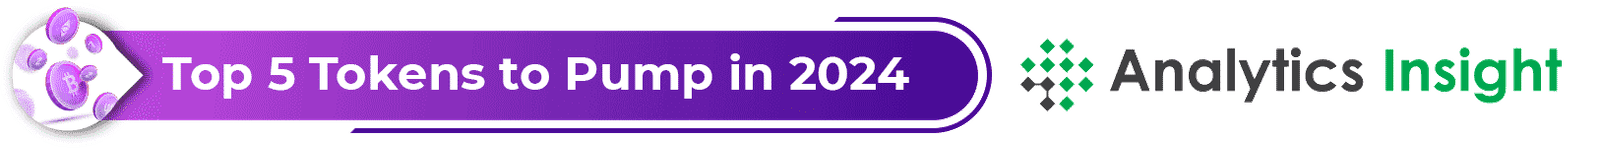 Top 5 Tokens to Pump in 2024